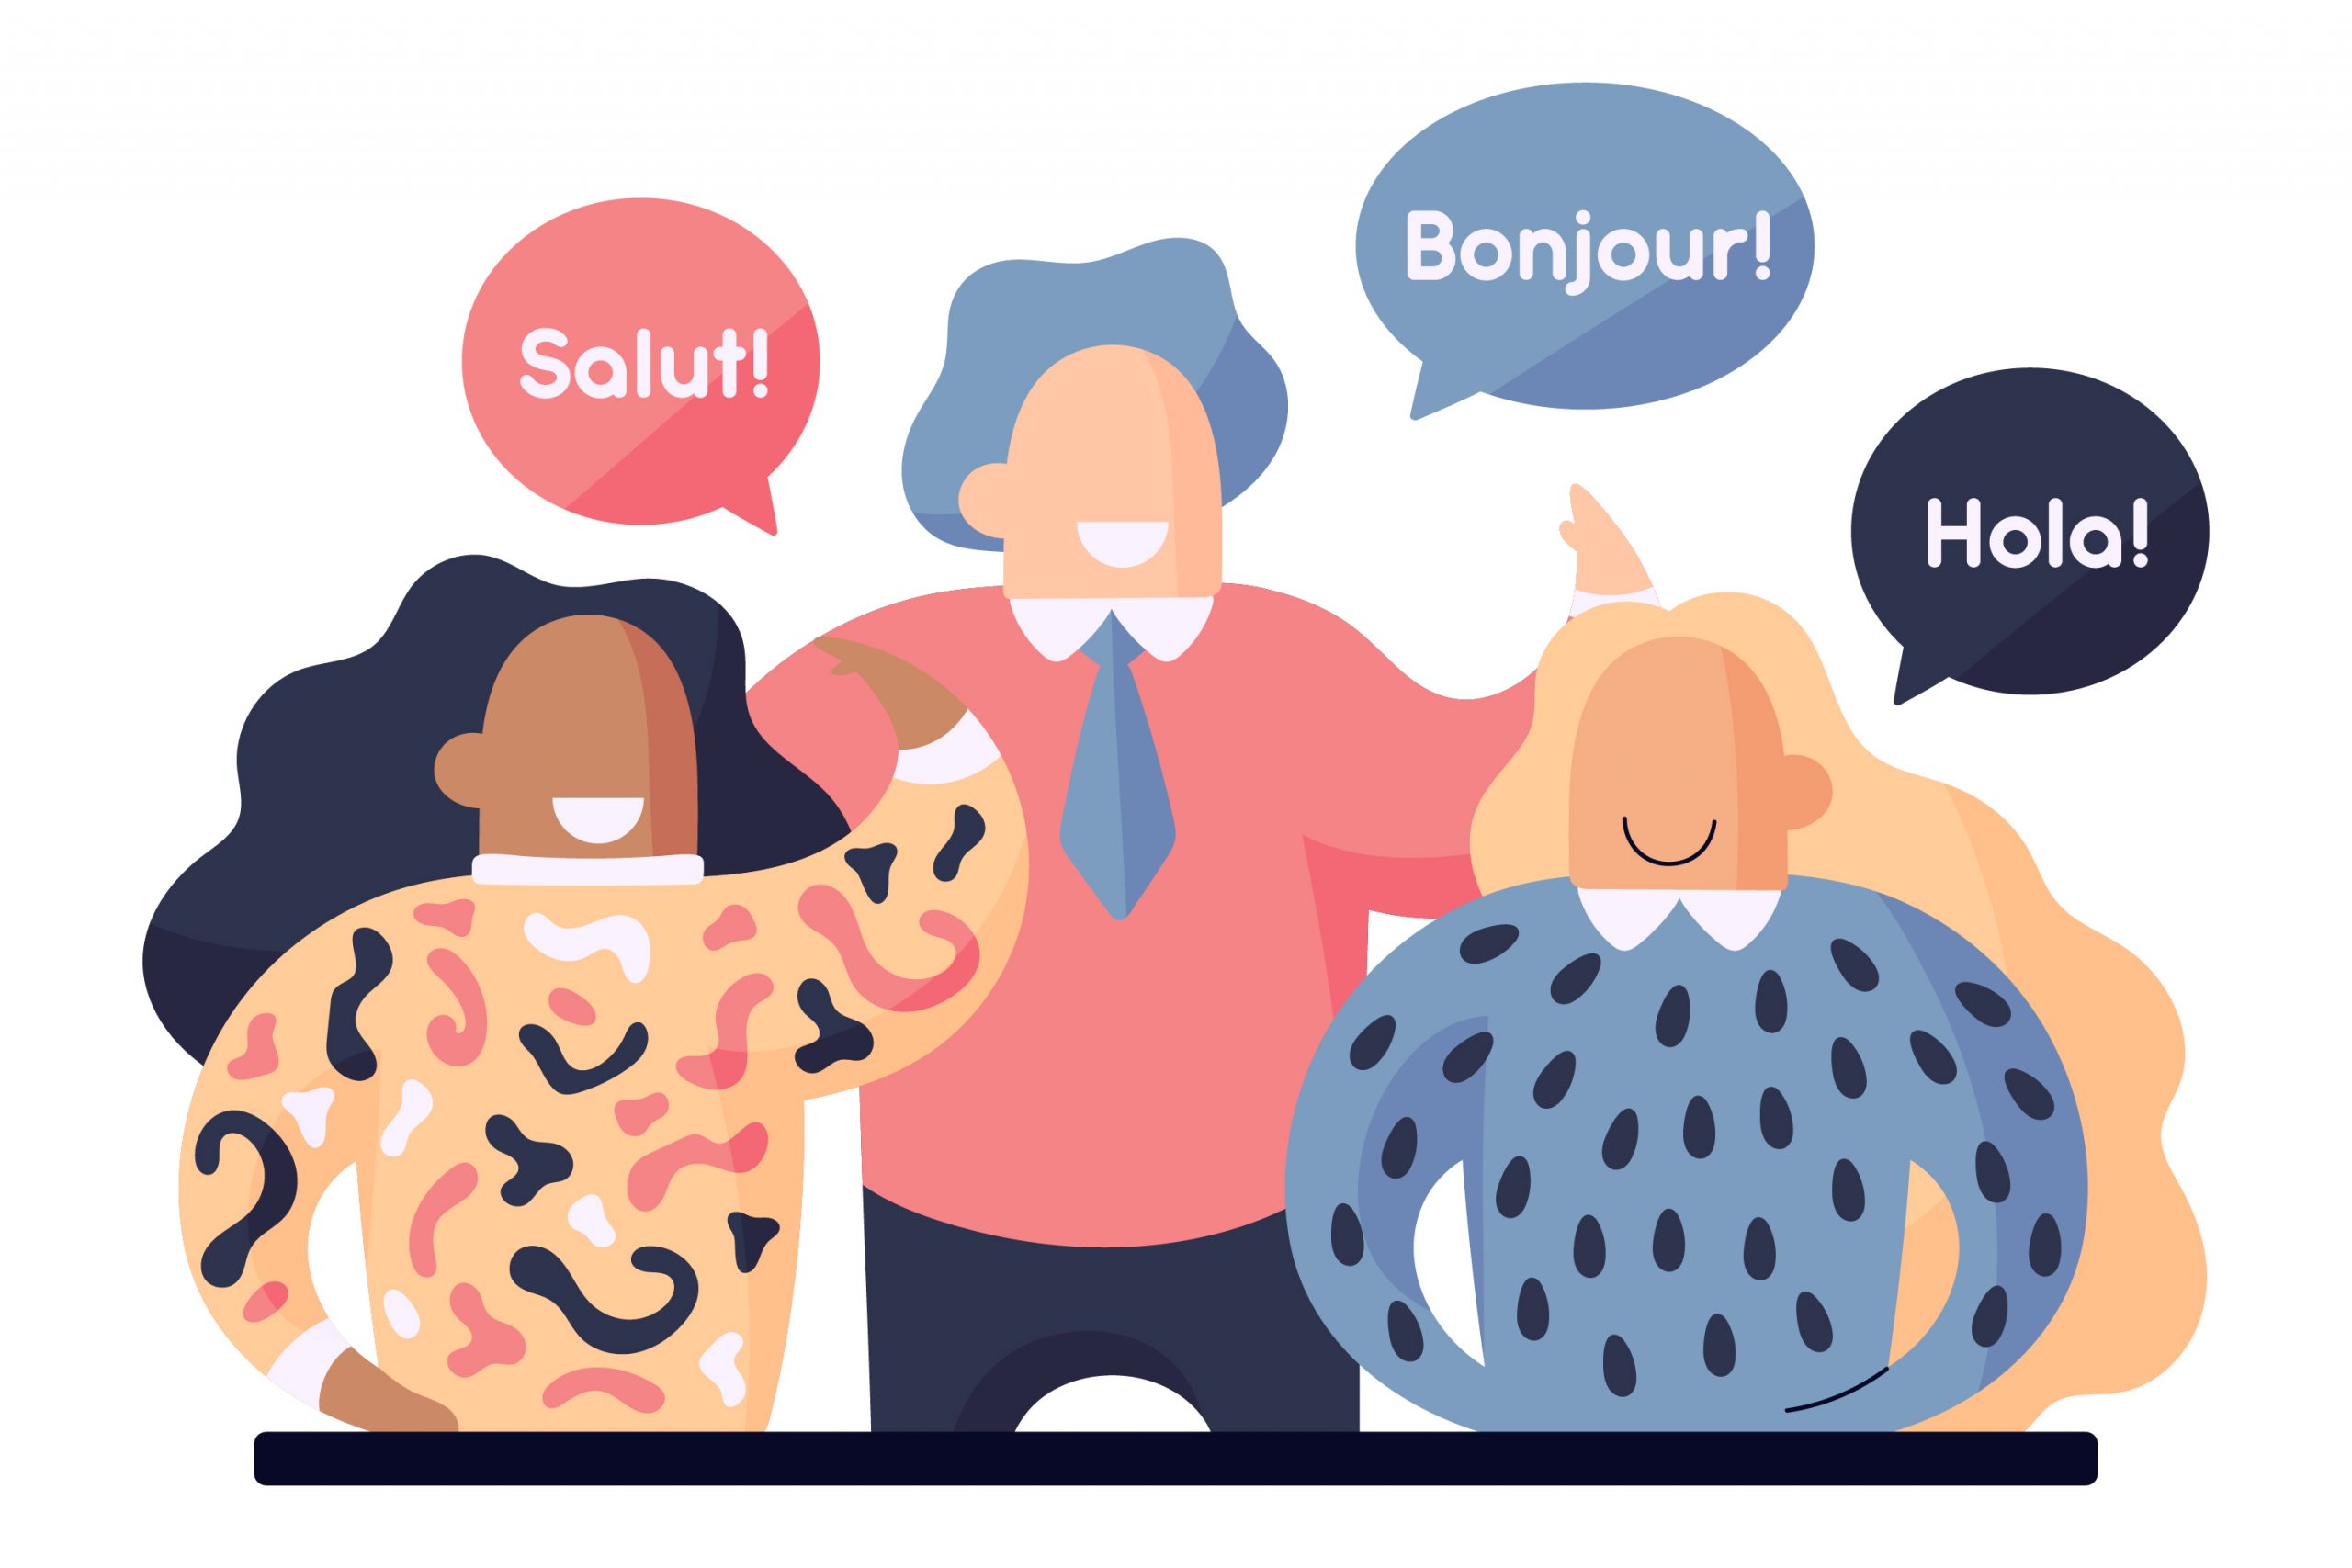 A group of people say "Hello" in French and Spanish